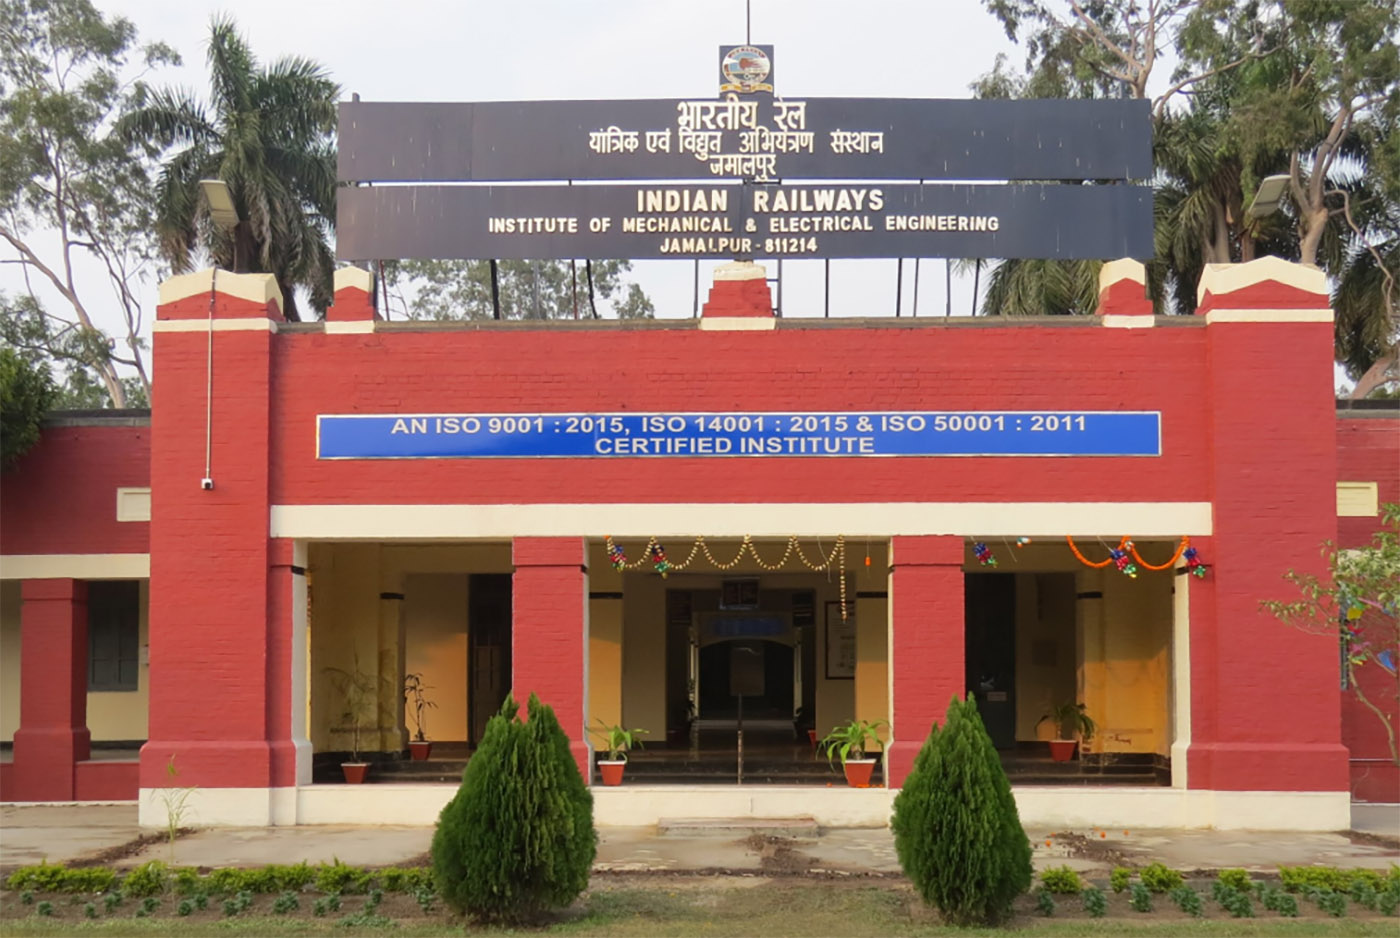 Iconic Indian Railways Institute of Mechanical and Electrical Engineering Jamalpur. Photo Courtesy: railpost.in